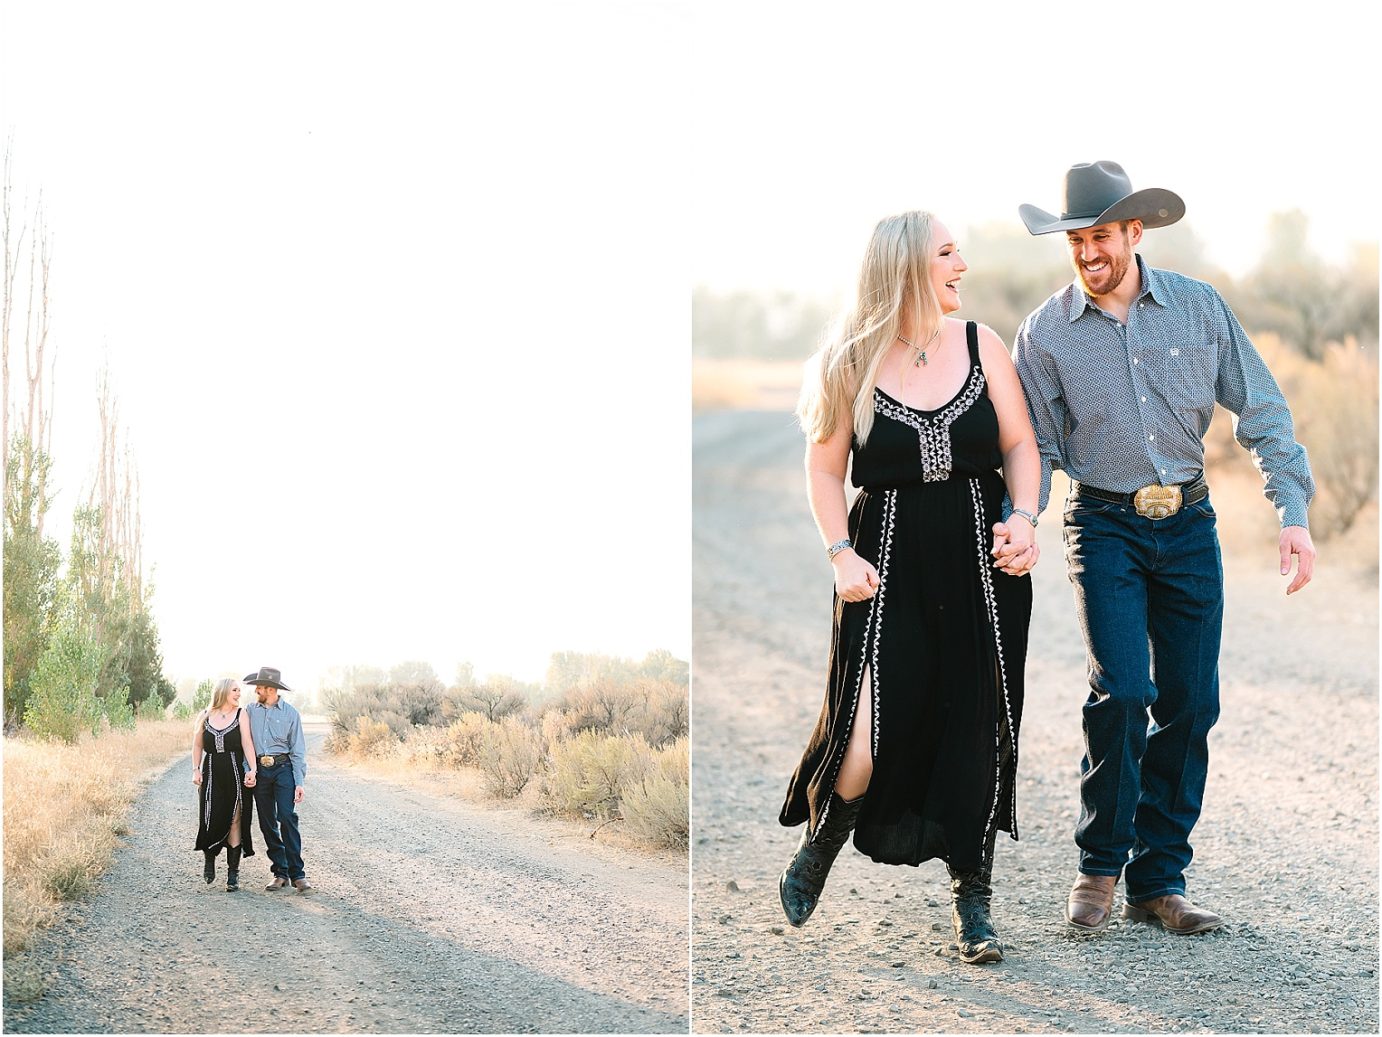 Engagement session in the desert Central WA Andrew and Shelby couple wearing western attire